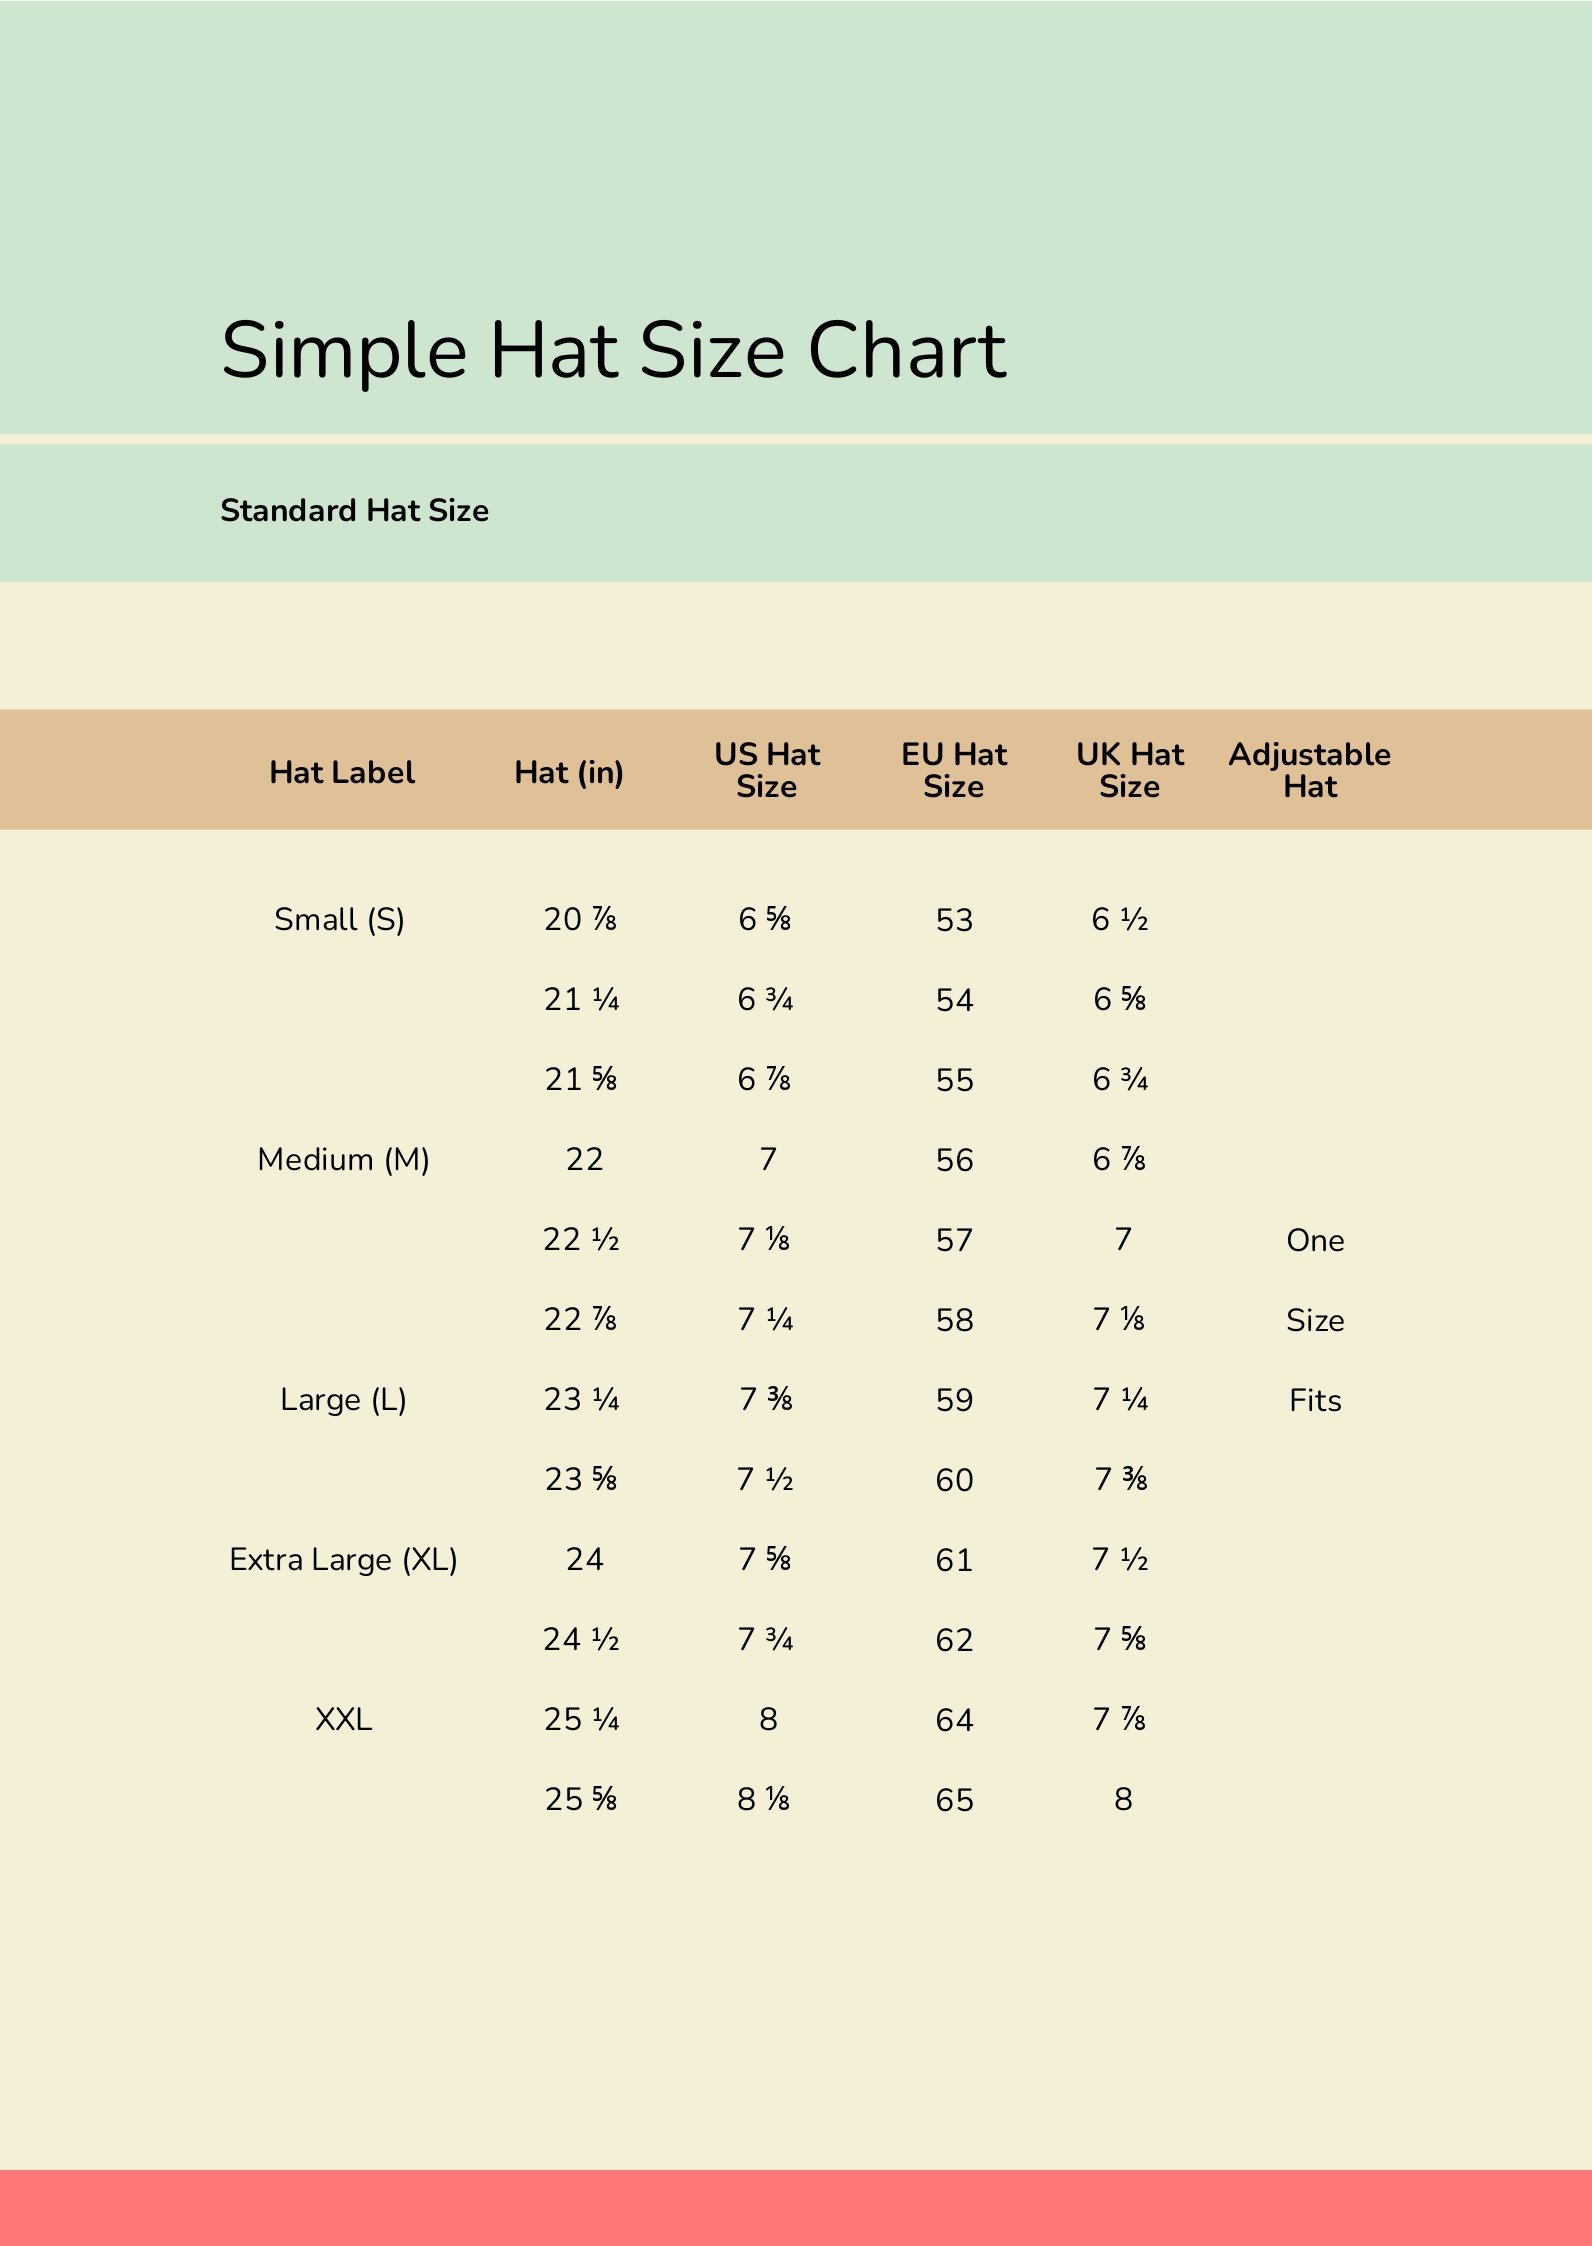 Simple Hat Size Chart in PDF